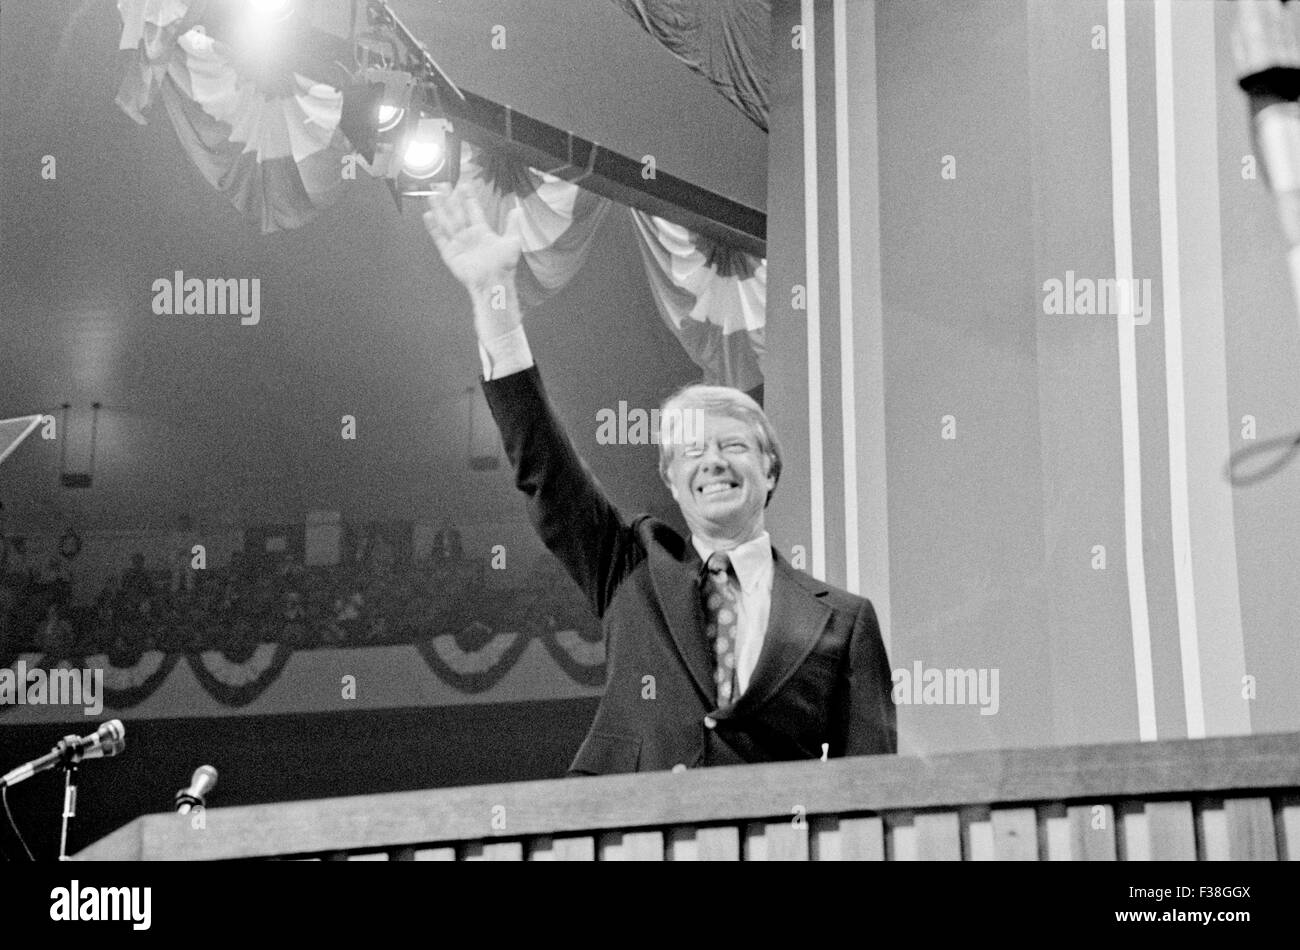 Gov. Jimmy Carter waves to supporters after capturing the Democratic Party nomination at the Democratic National Convention July 15, 1976 in New York, NY. Stock Photo